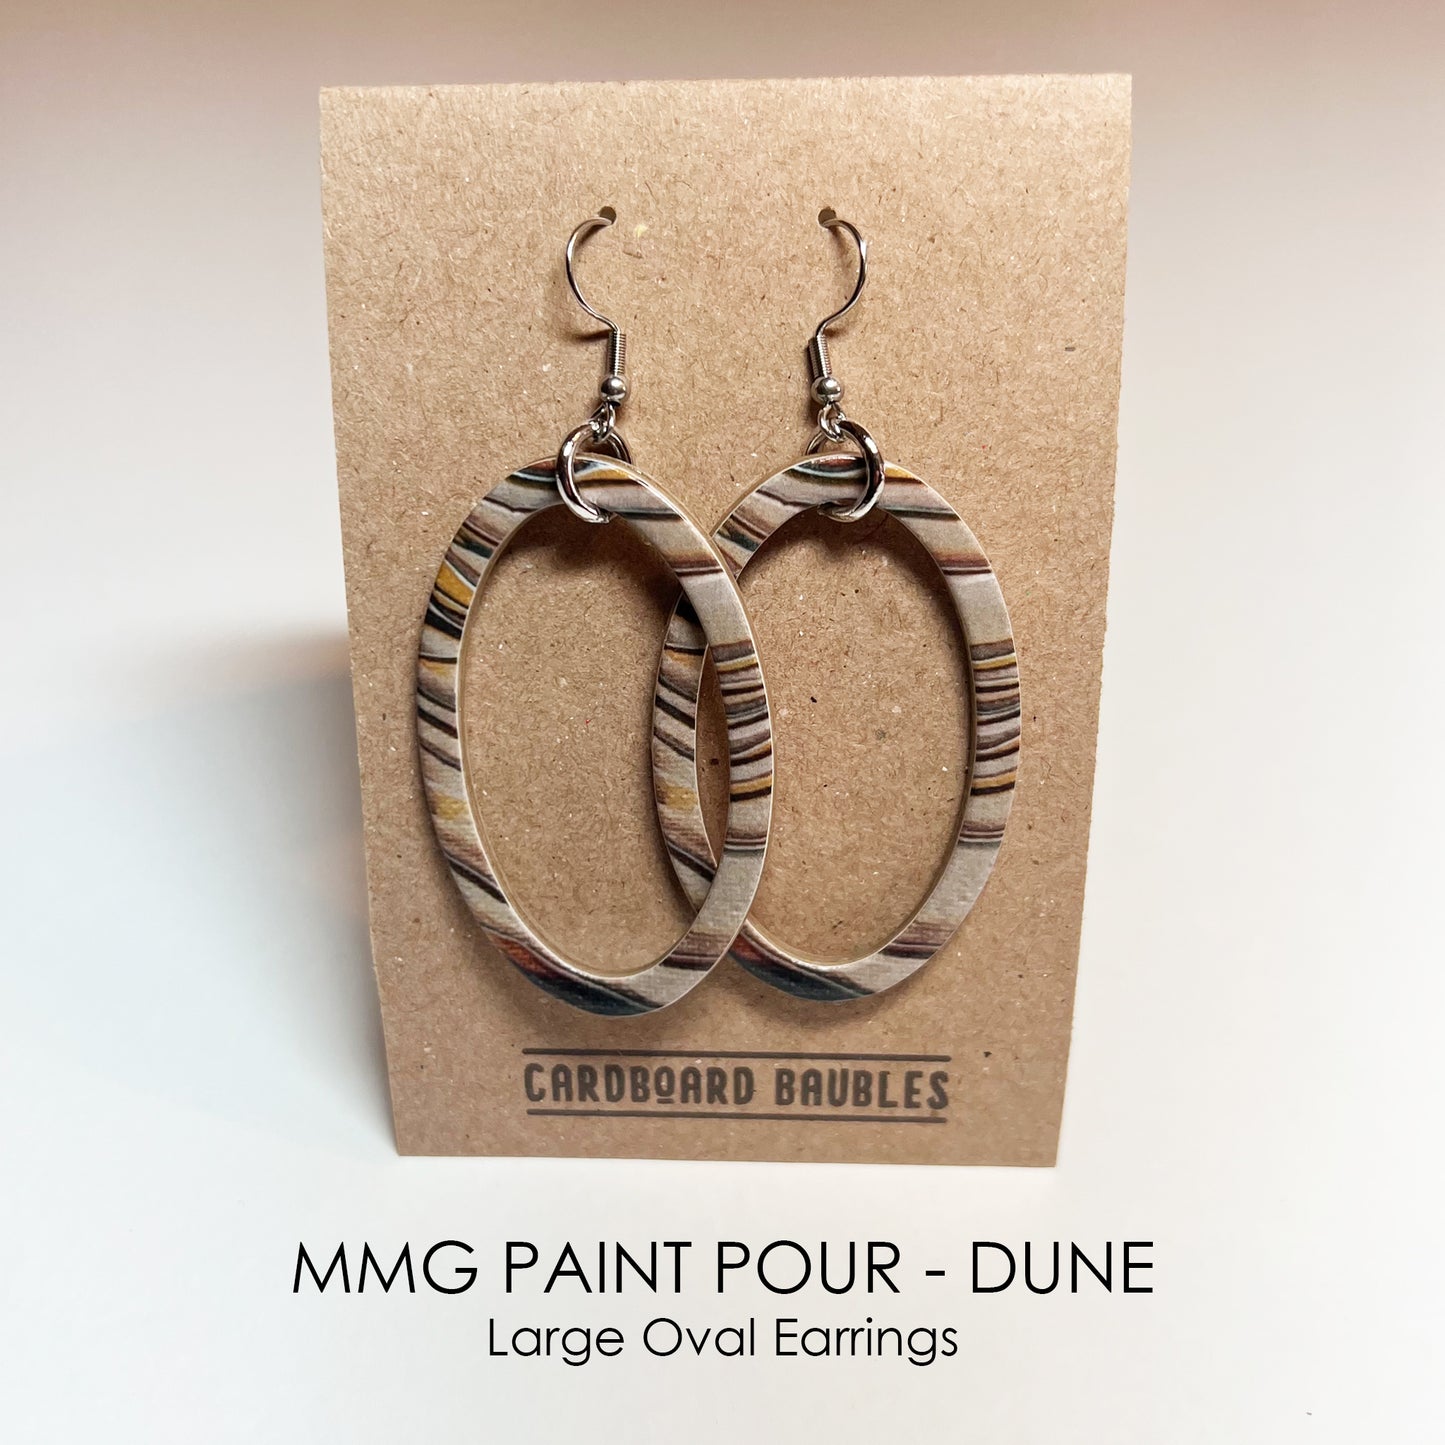 MMG PAINT POUR - DUNE - Oval Cardboard Baubles Earrings